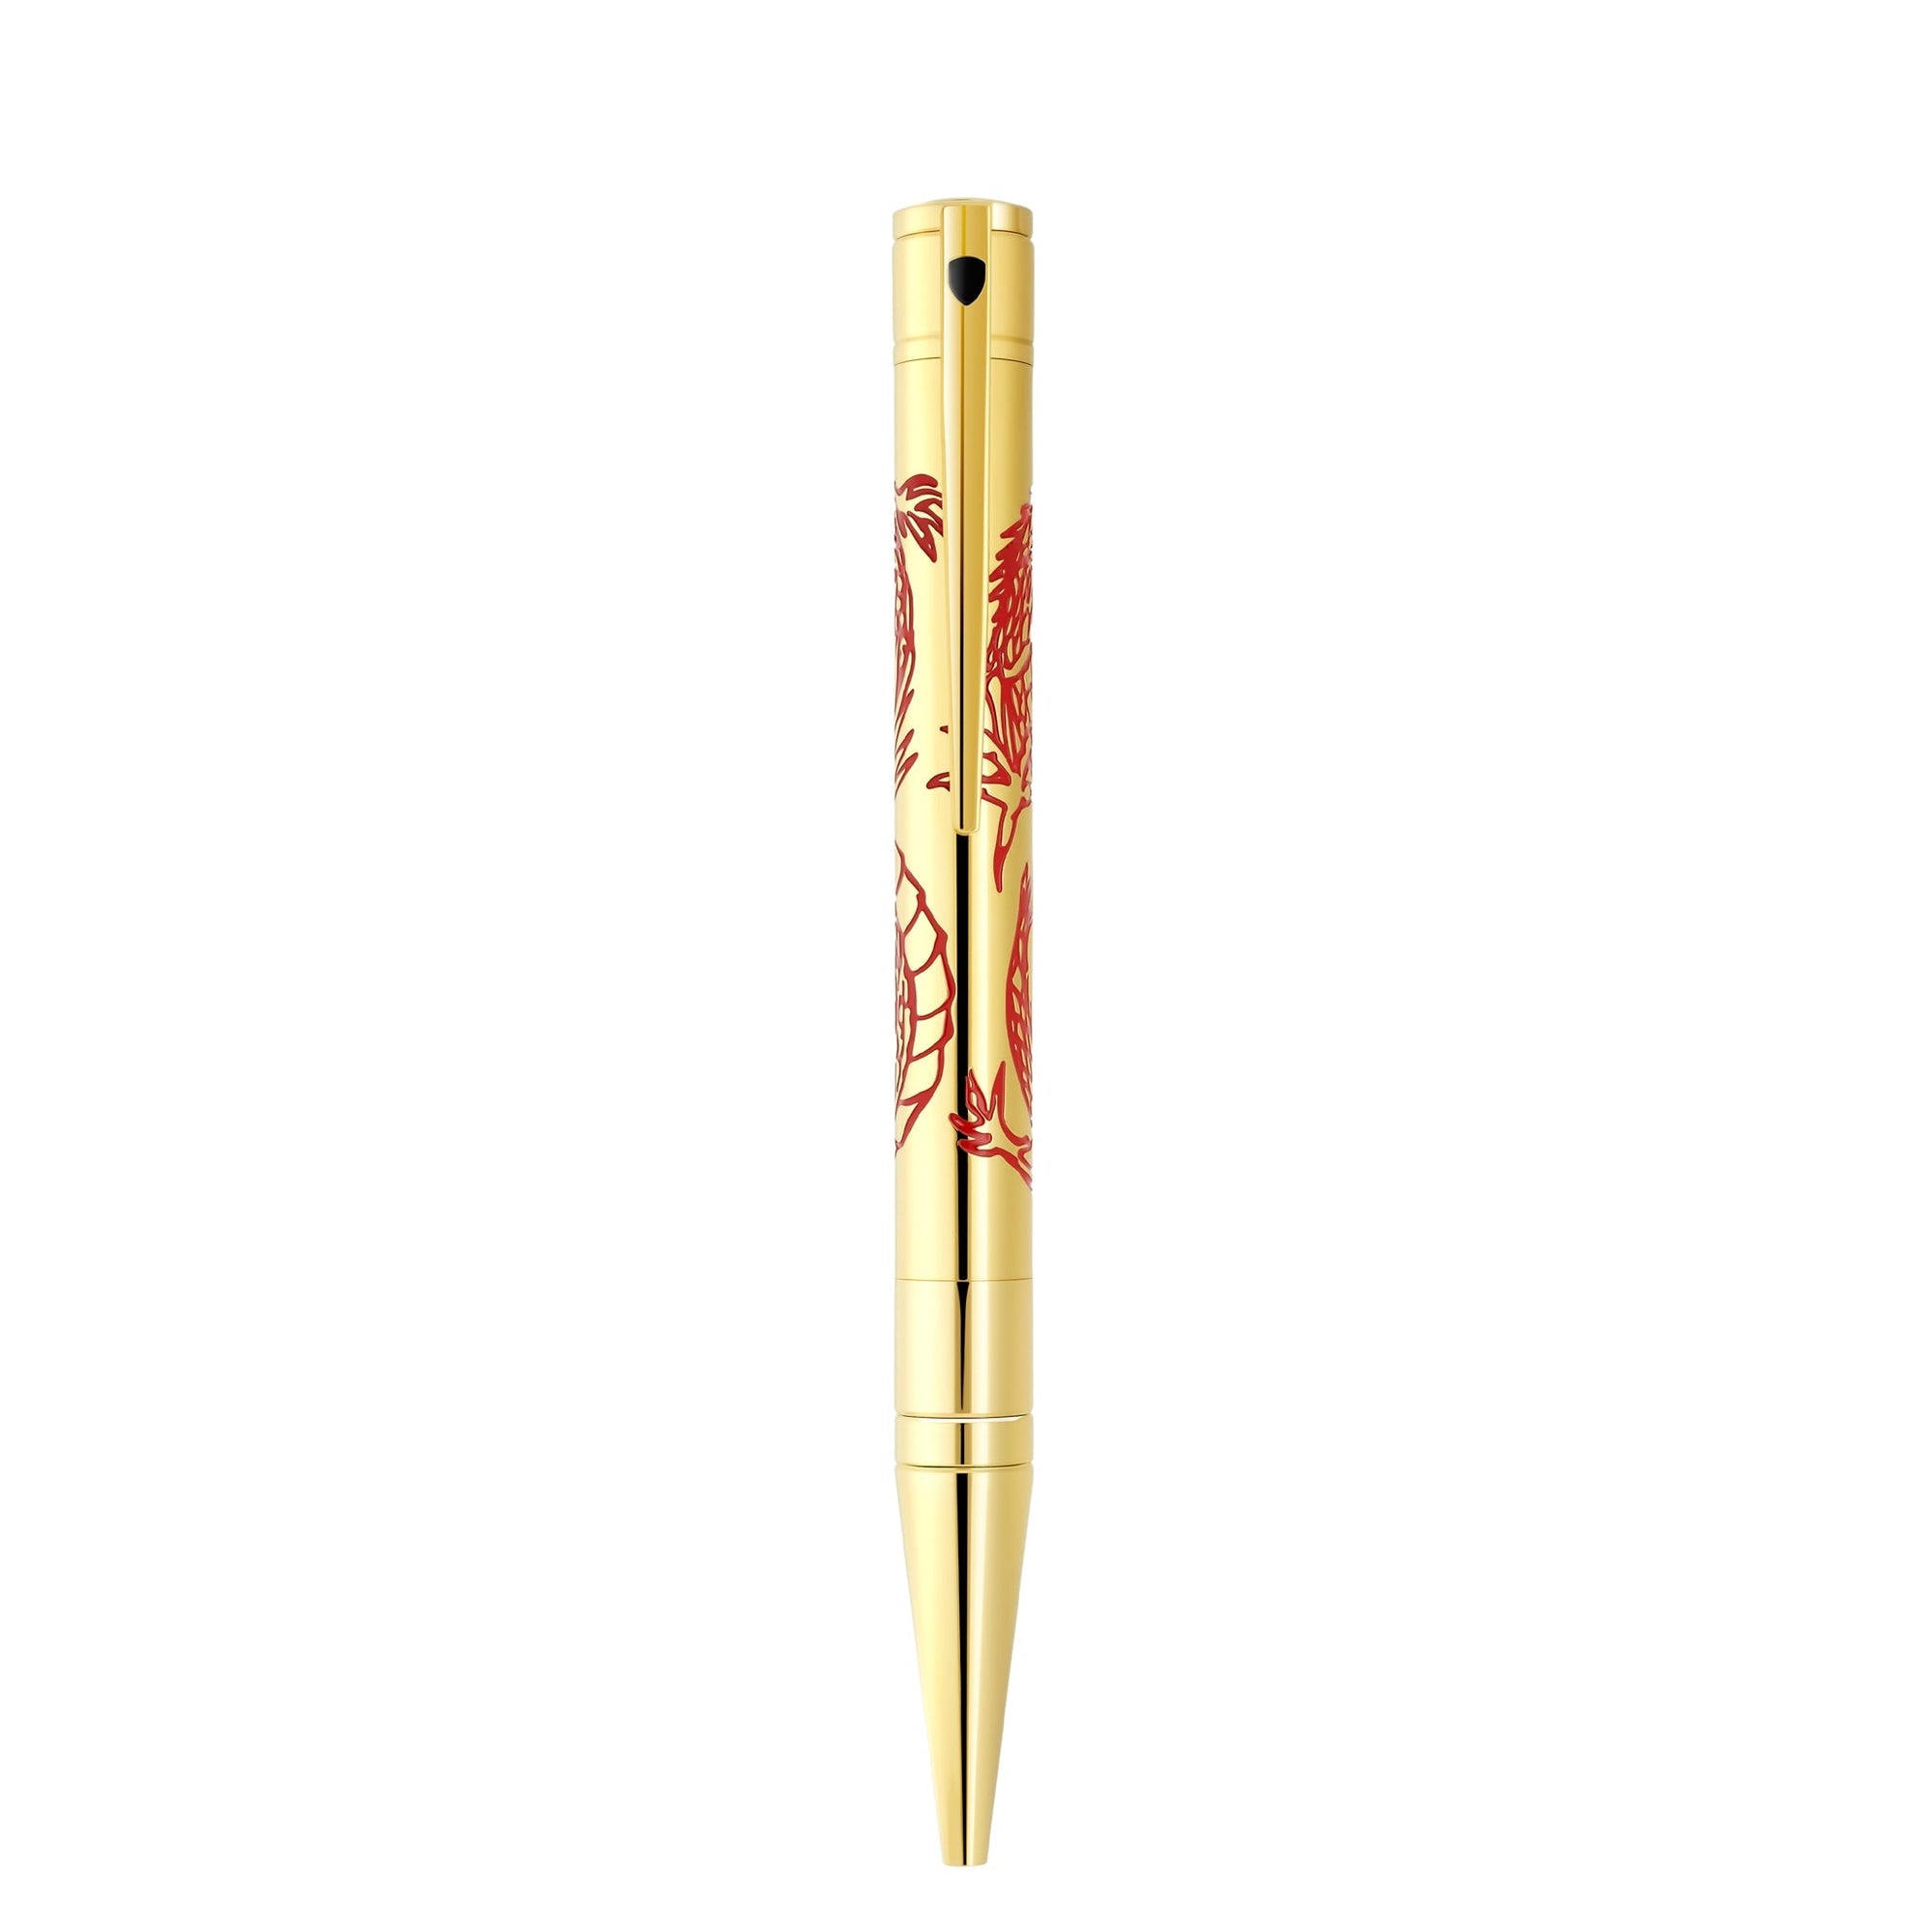 DUPONT ACCESSORIES S.T.DUPONT WI D-INITIAL BP DRAGON GOLDEN NO.265026